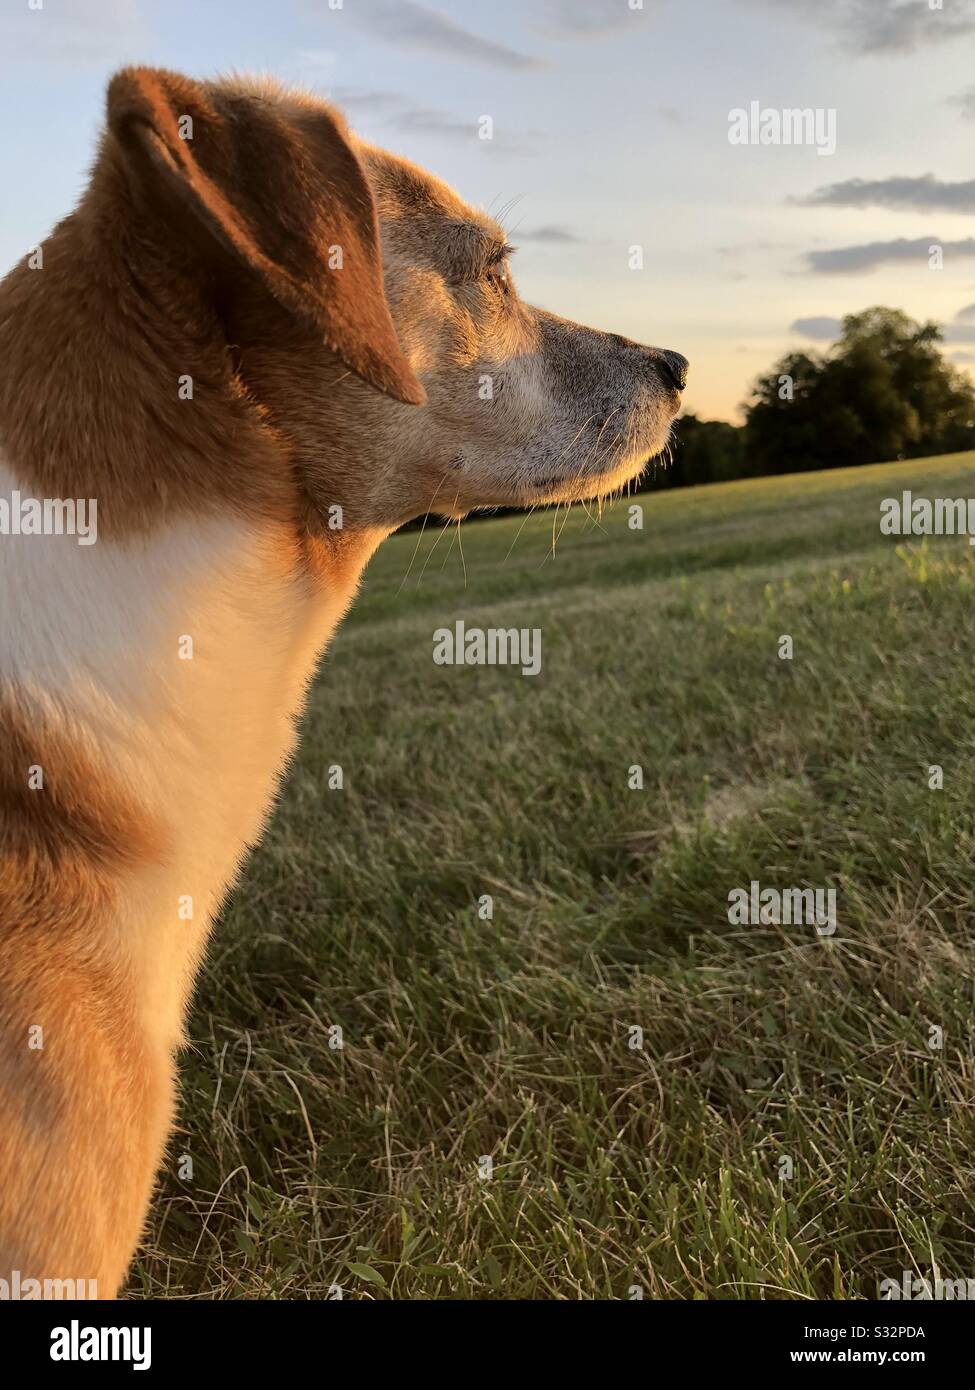 A dog (Jack Russell Terrier, Beagle mix breed) out for a walk at sundown. Stock Photo